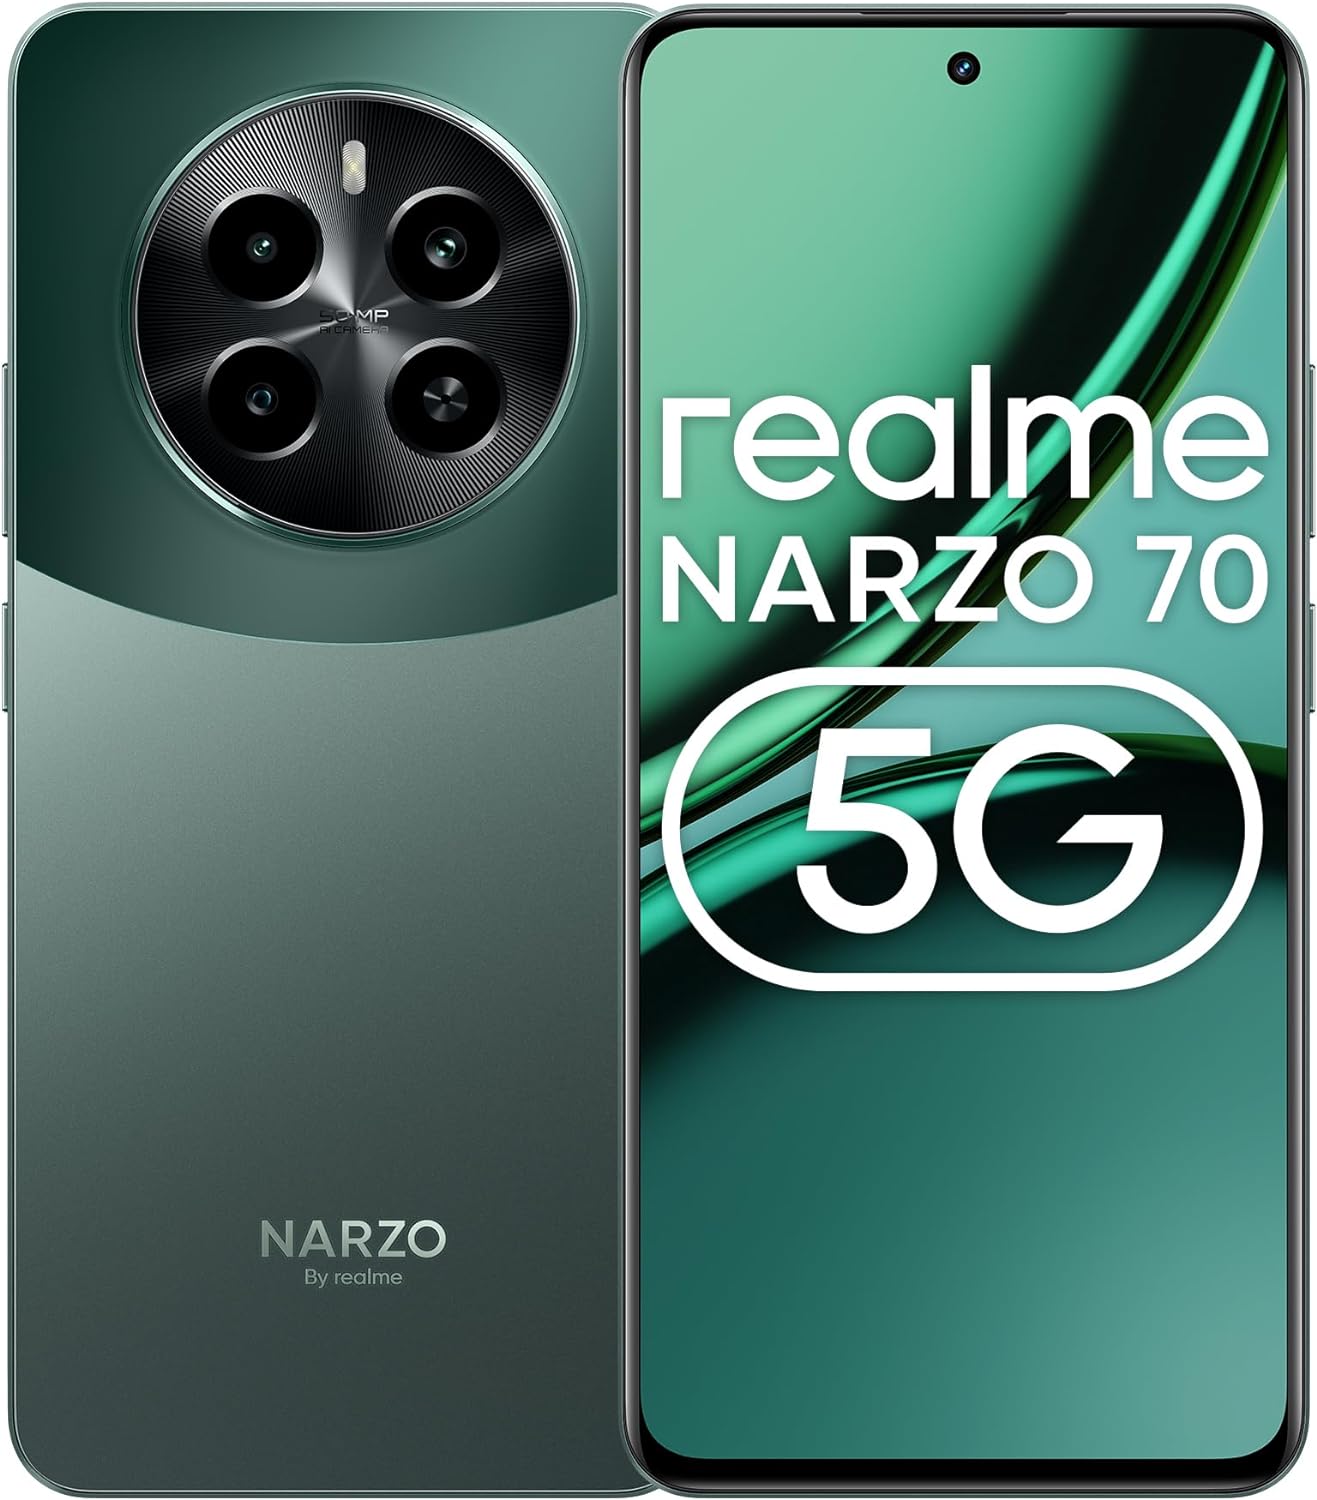 realme NARZO 70 5G (Forest Green,6GB RAM, 128GB Storage | Dimensity 7050 5G Chipset | 120Hz AMOLED Display | 50MP Primary Camera | 45W Charger in The Box